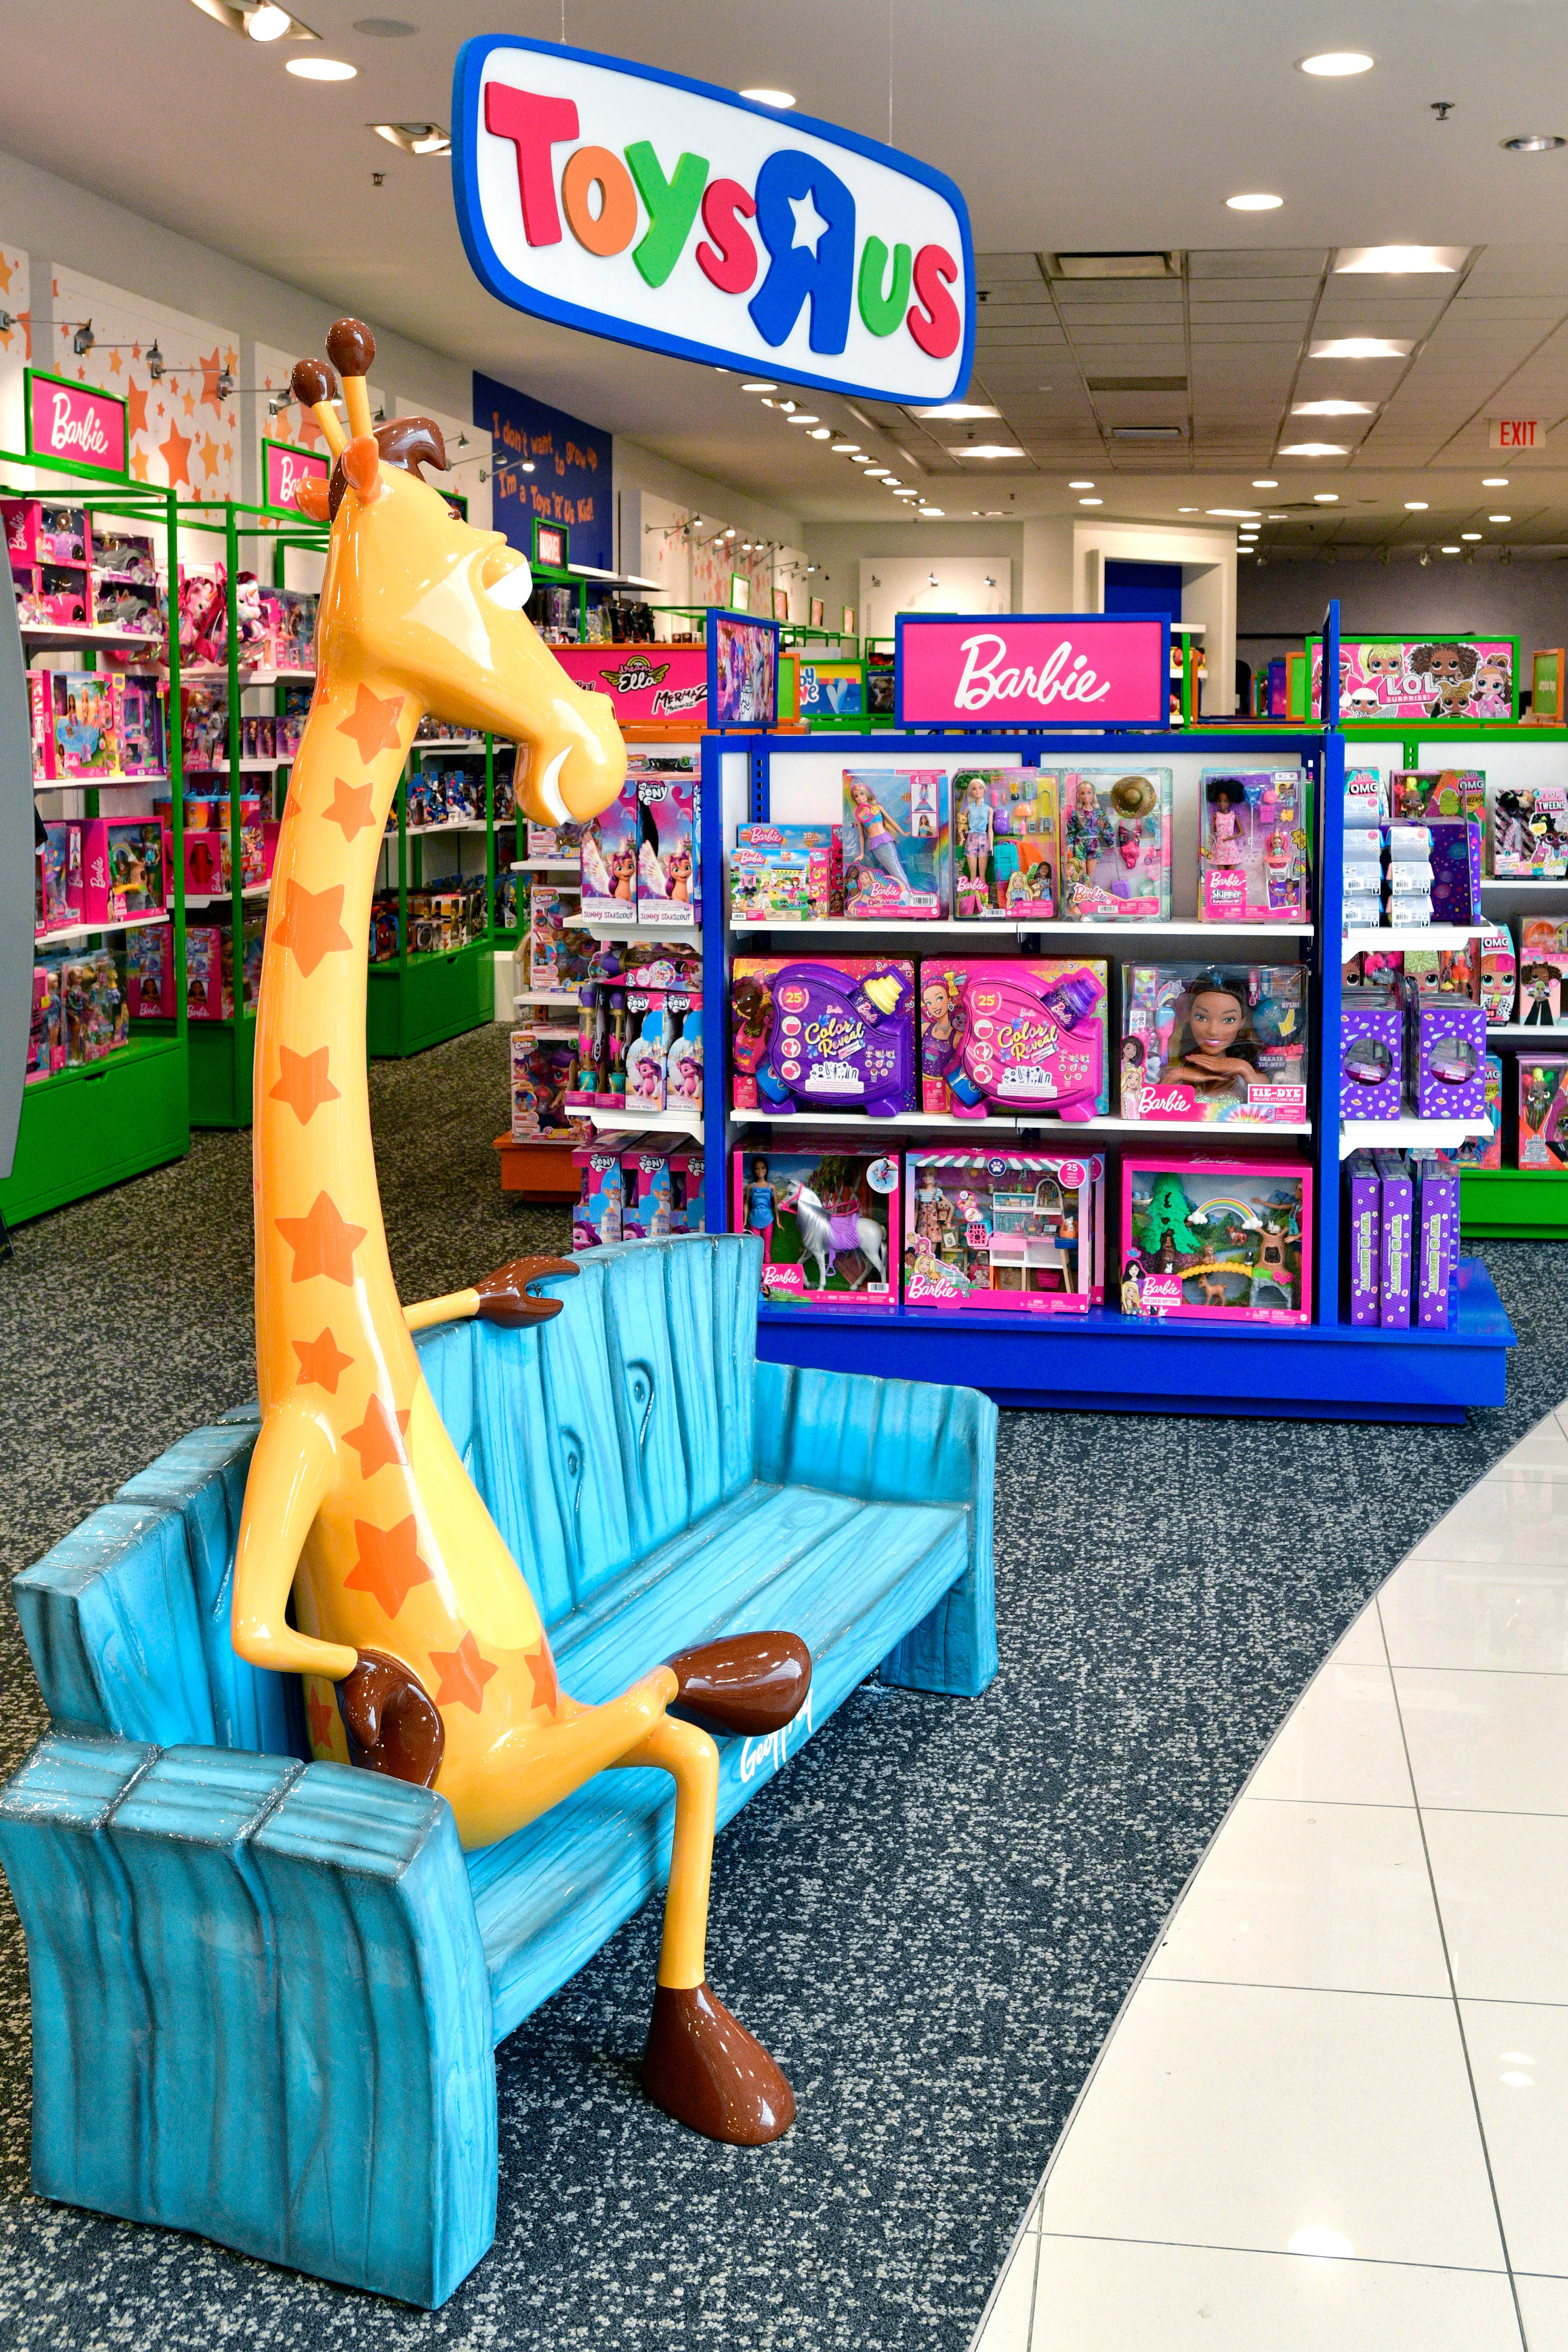 Toys R Us locations will open inside Macy's stores nationwide